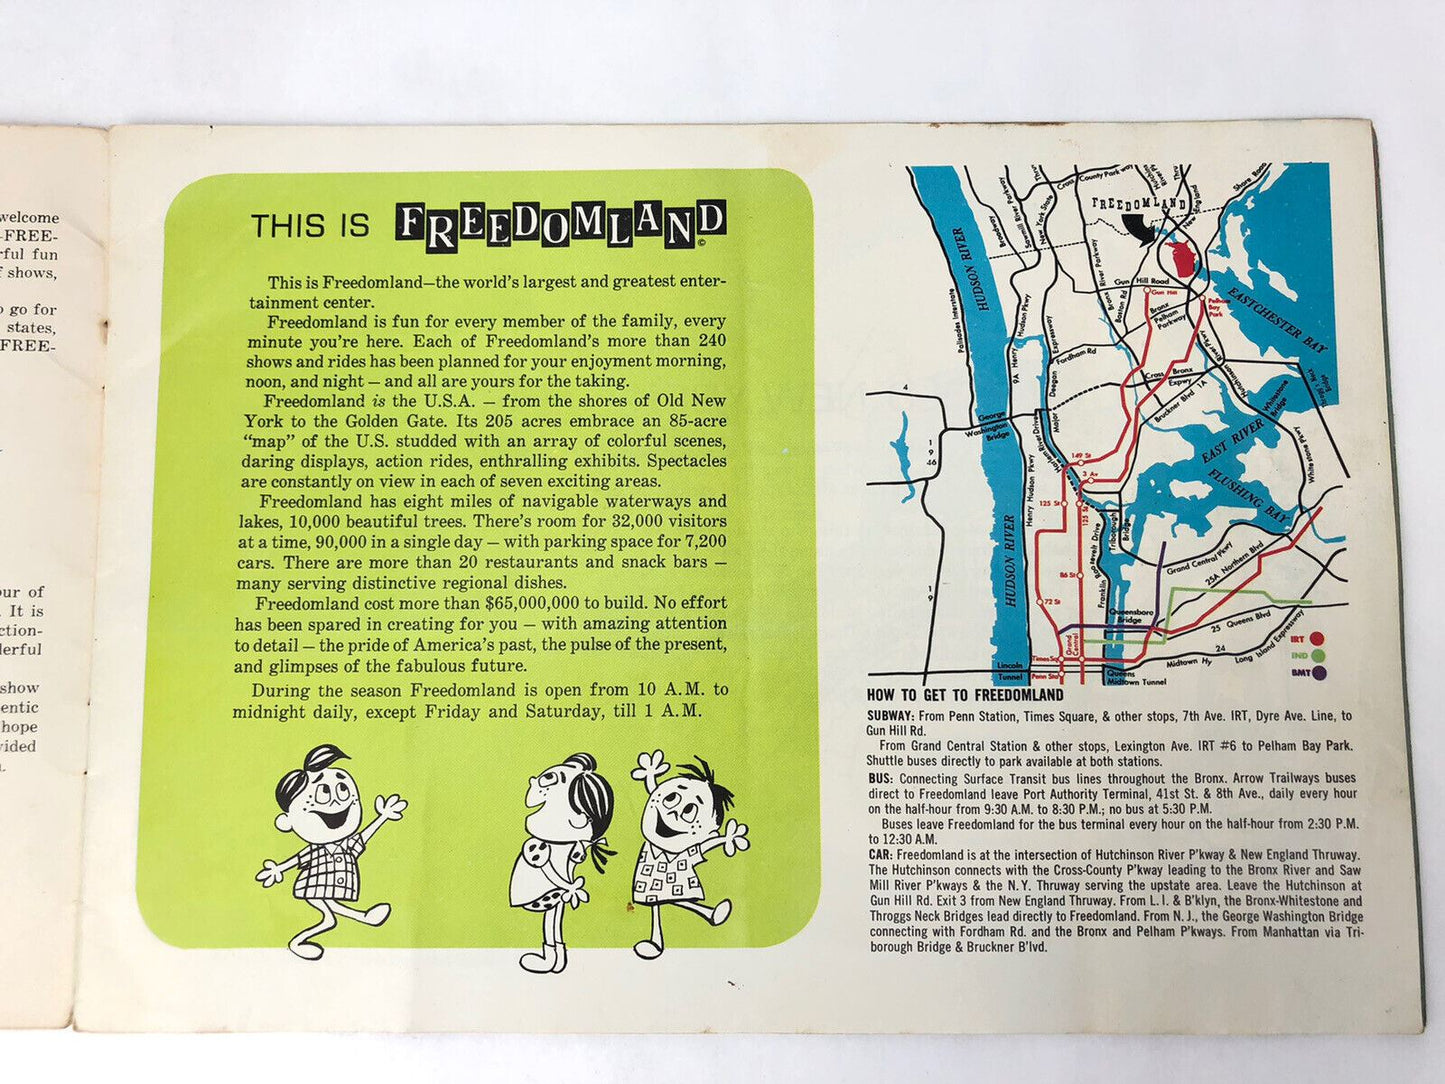 Vintage 1962 FREEDOMLAND Official Guide + Ticket BRONX NY Defunct Amusement Park